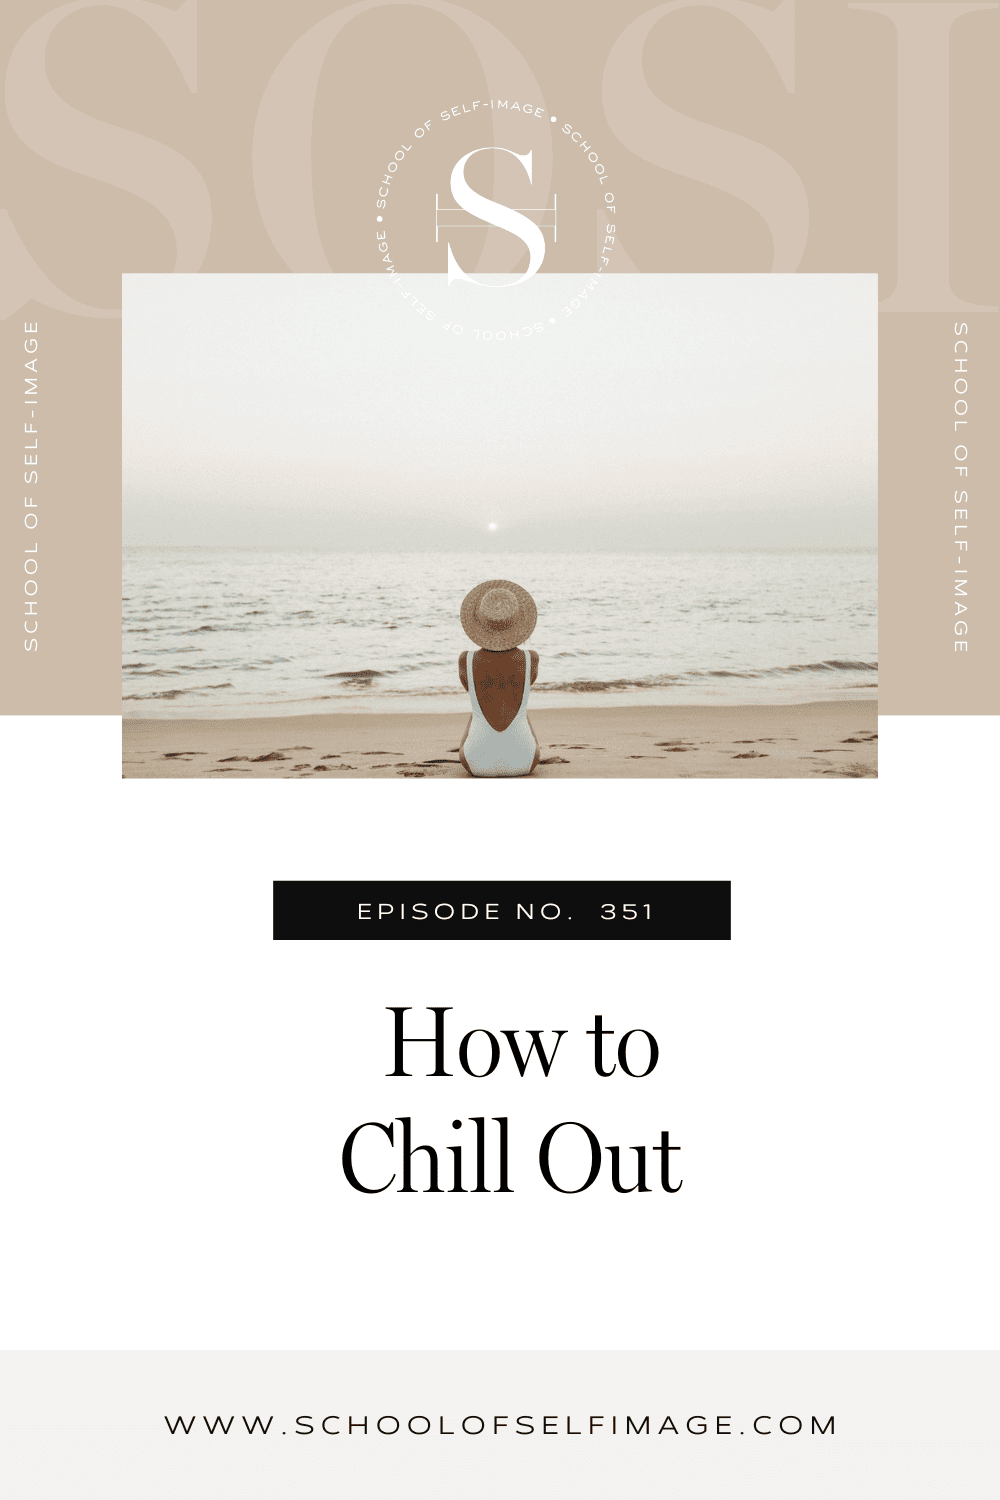 How to Chill Out